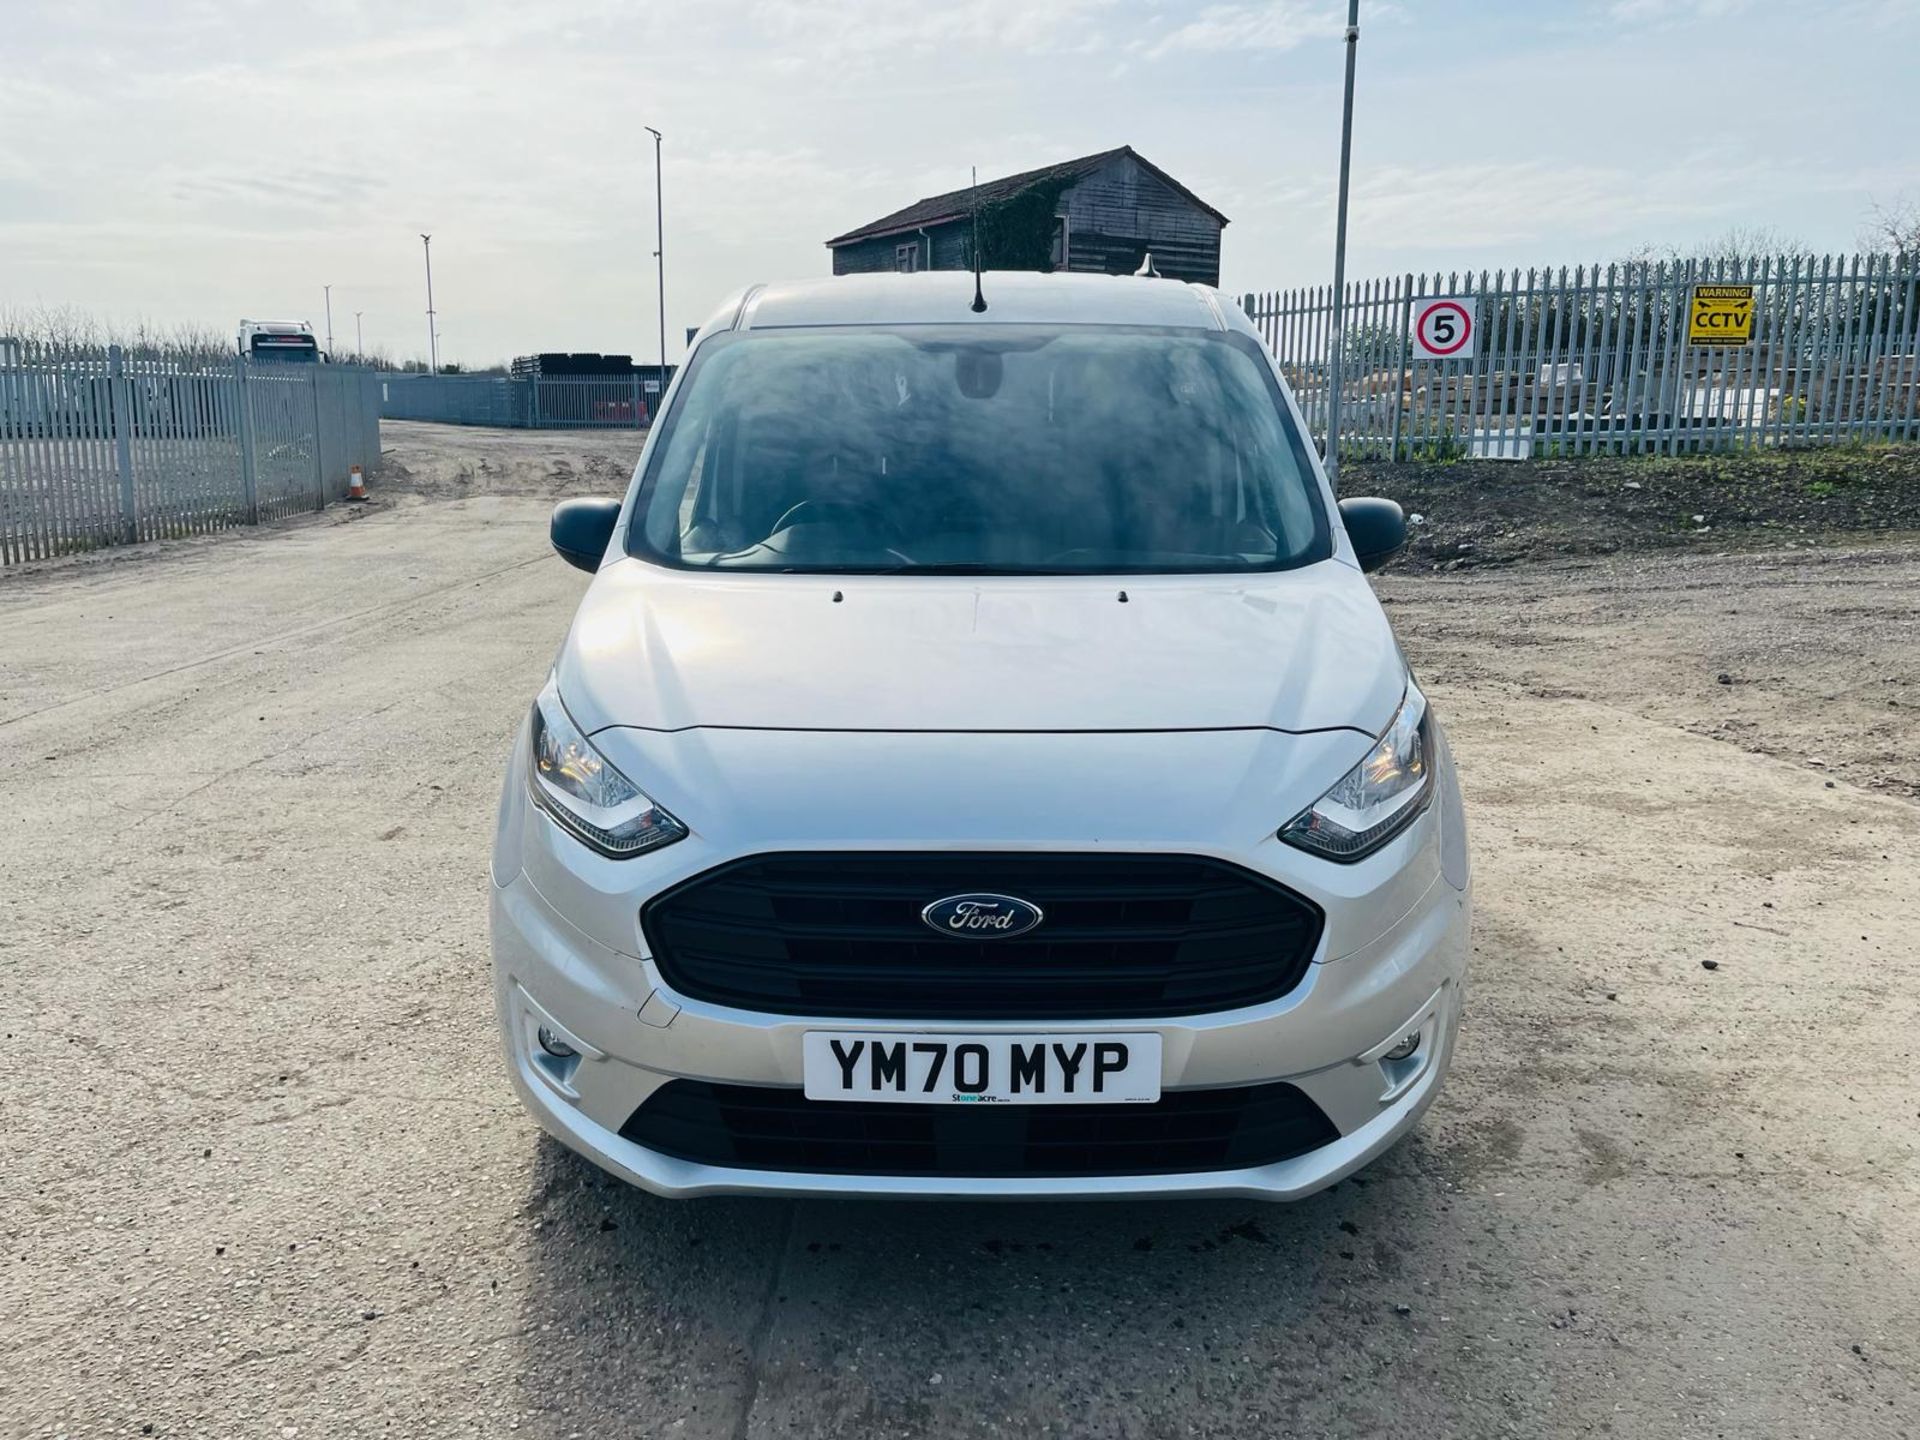 ** ON SALE ** Ford Transit Connect 1.5 TDCI L1H1-2020 '70 Reg'- 1 Previous Owner -Alloy Wheels - Image 2 of 27